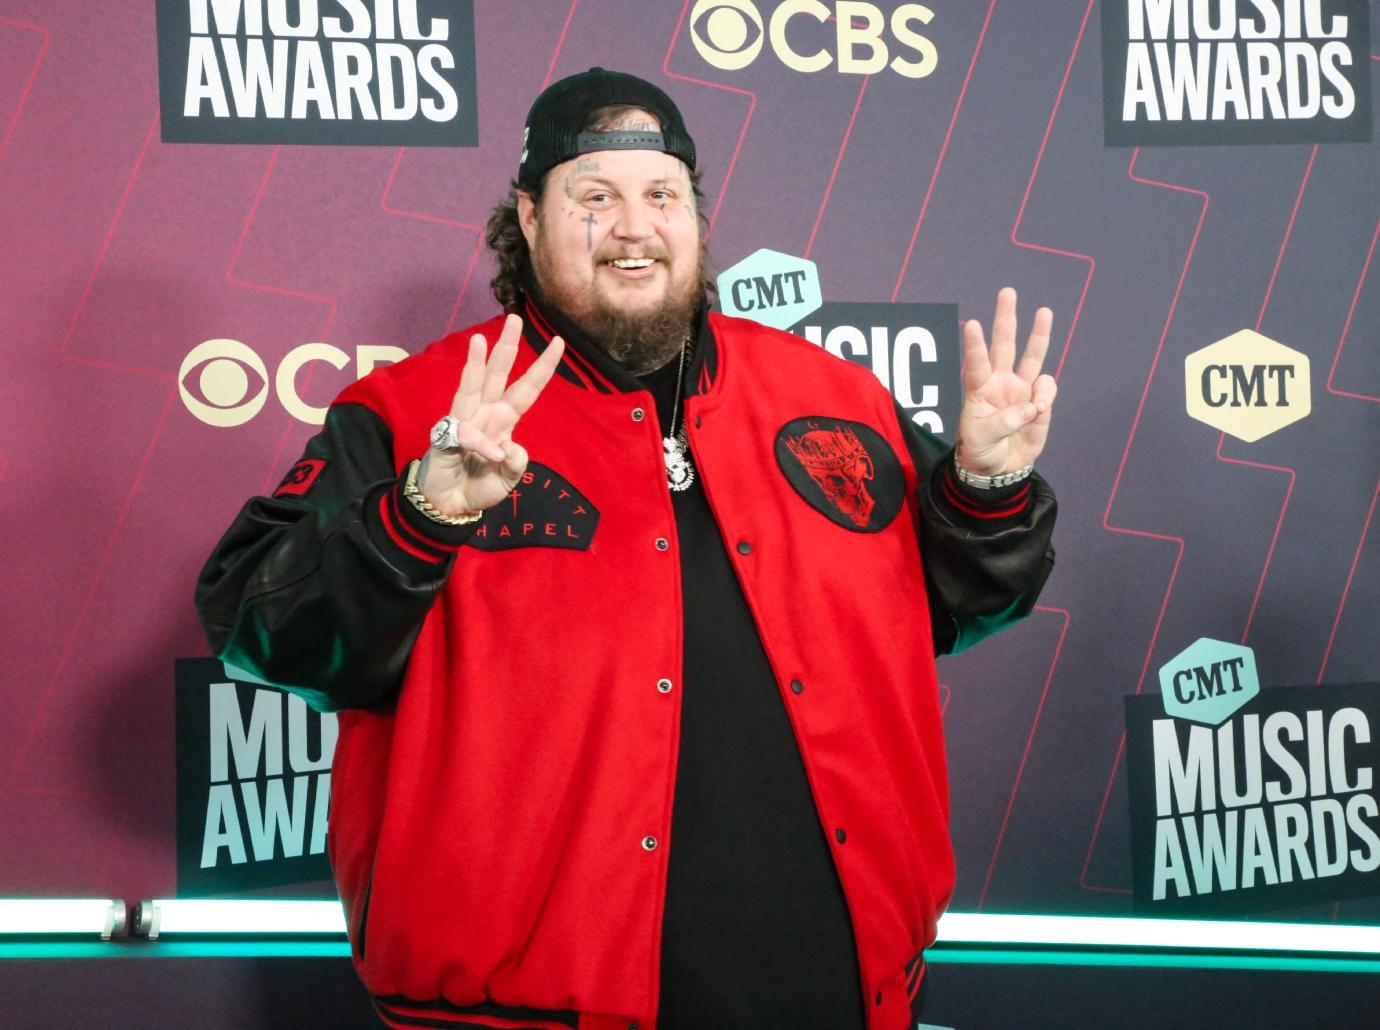 Jelly Roll Opens Up About Troubled Past Ahead Of Country Music Awards